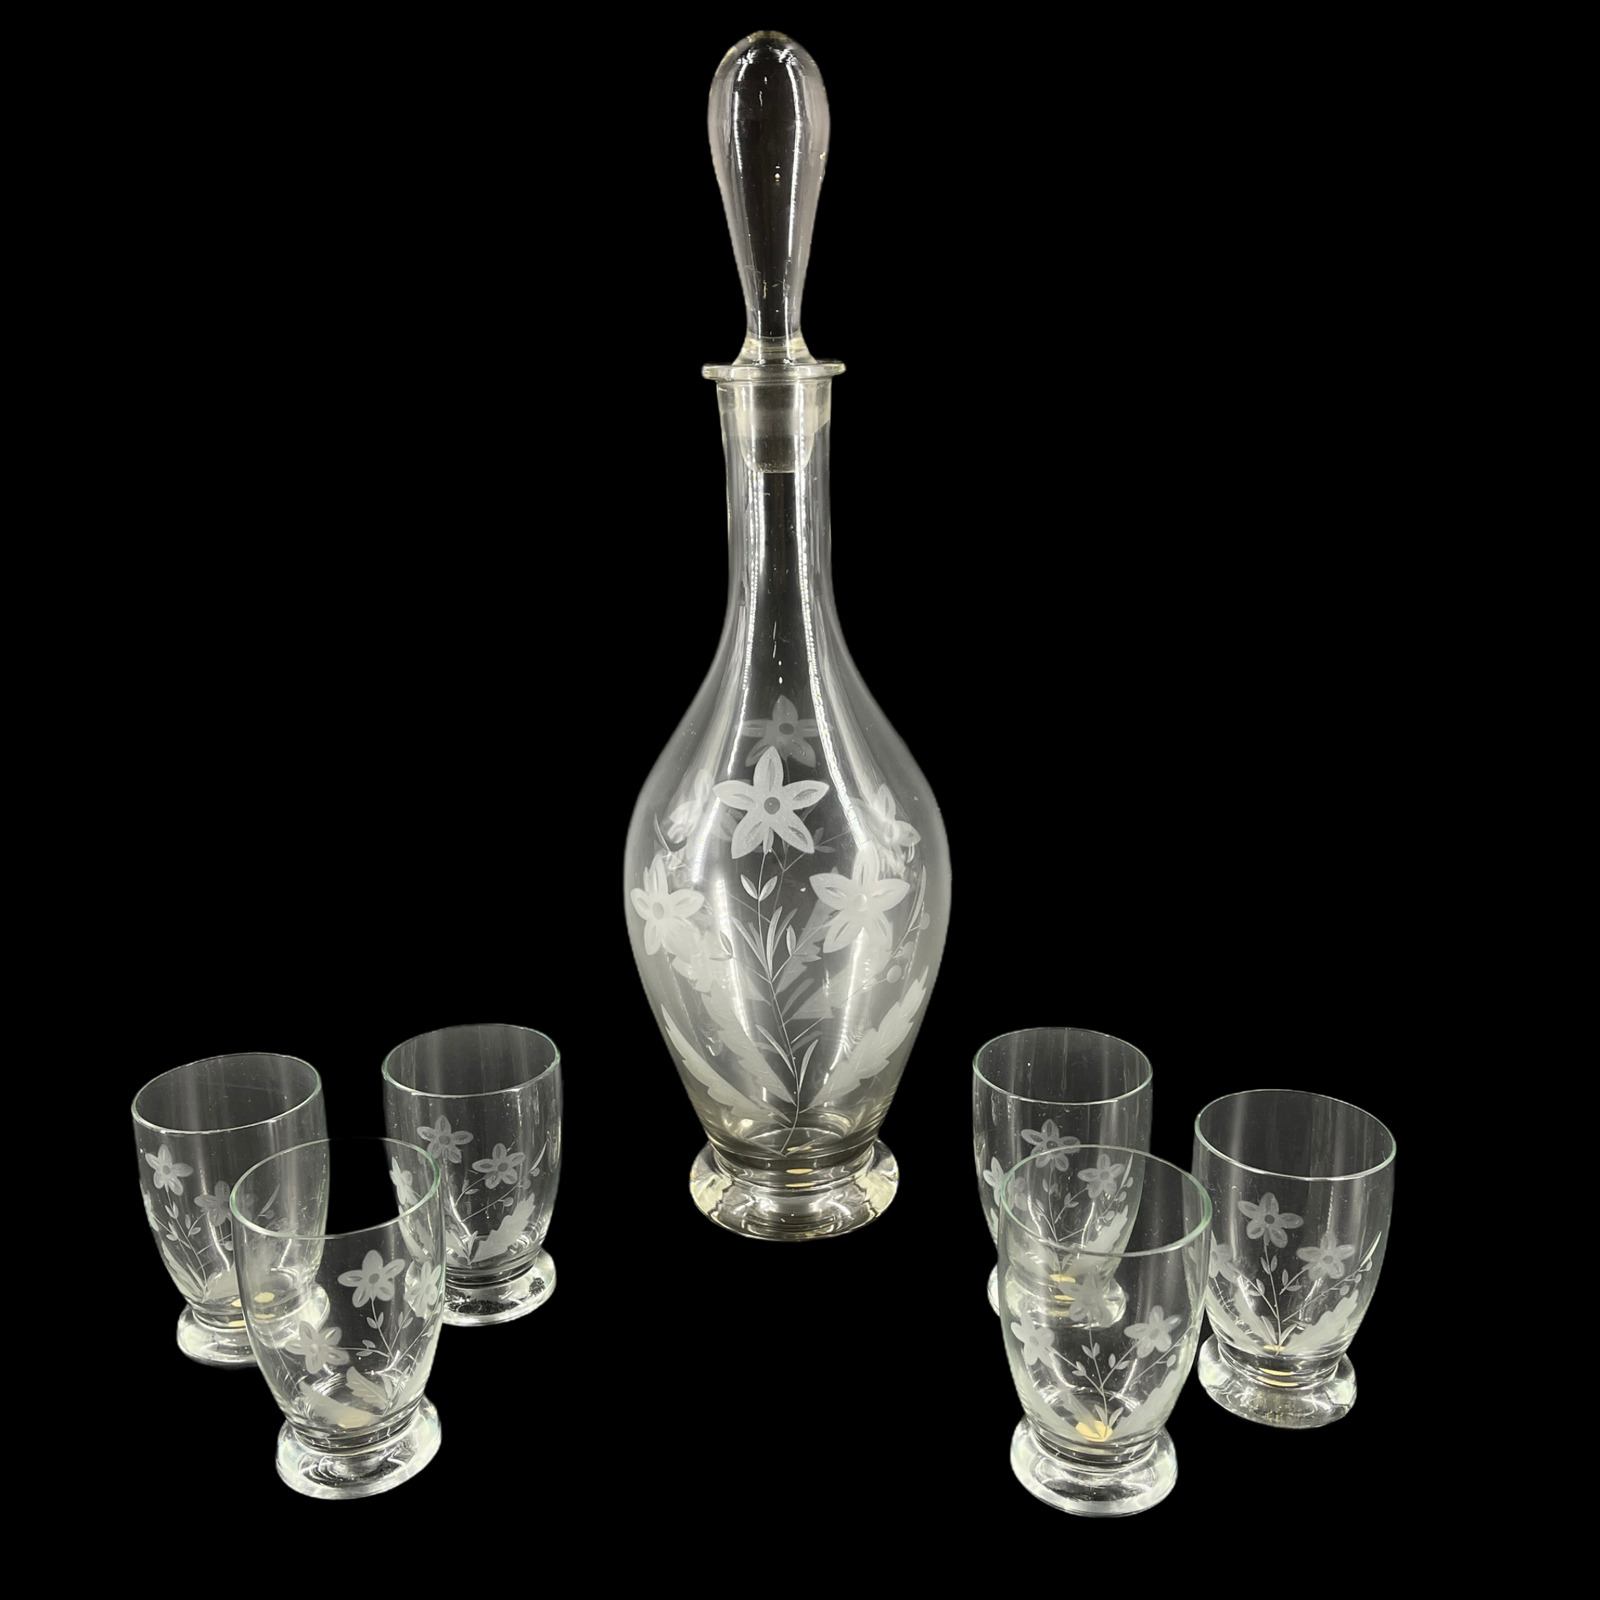 Vintage Decanter Set Etched Cut Glass 6 Cordial Glasses Flowers Made in Romania